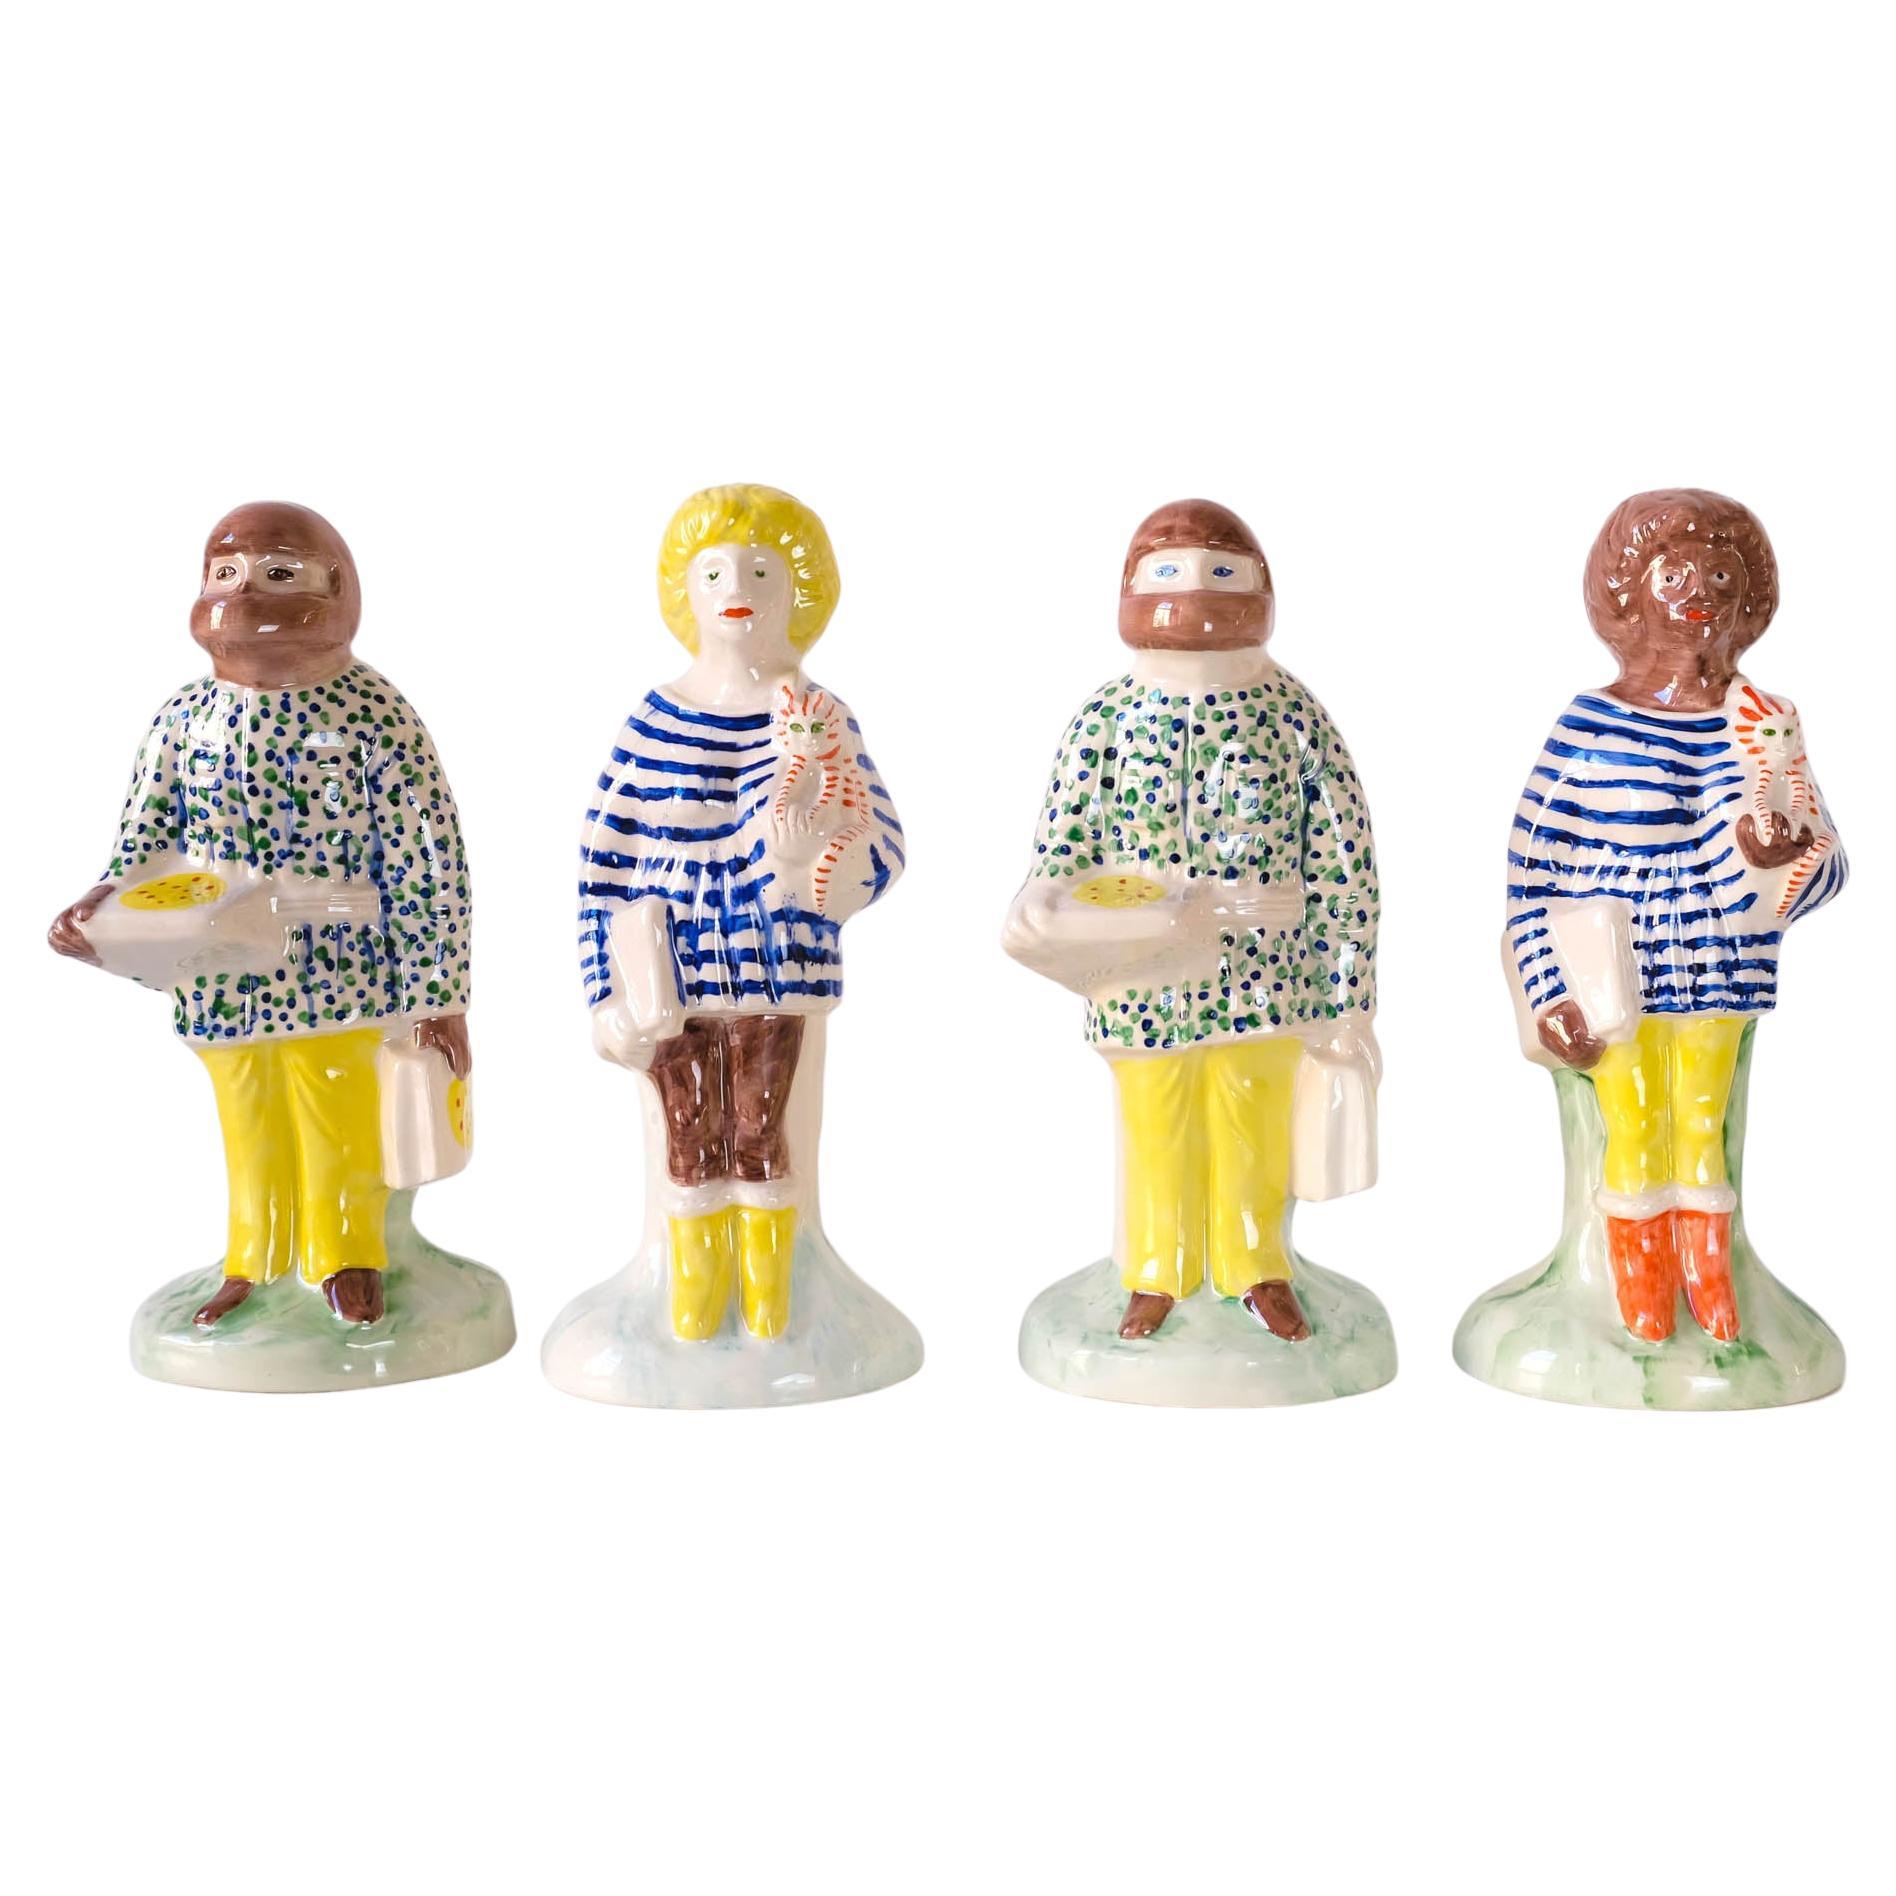 Grayson Perry's "Home Worker & Key Worker" Complete Set of Staffordshire Figures For Sale